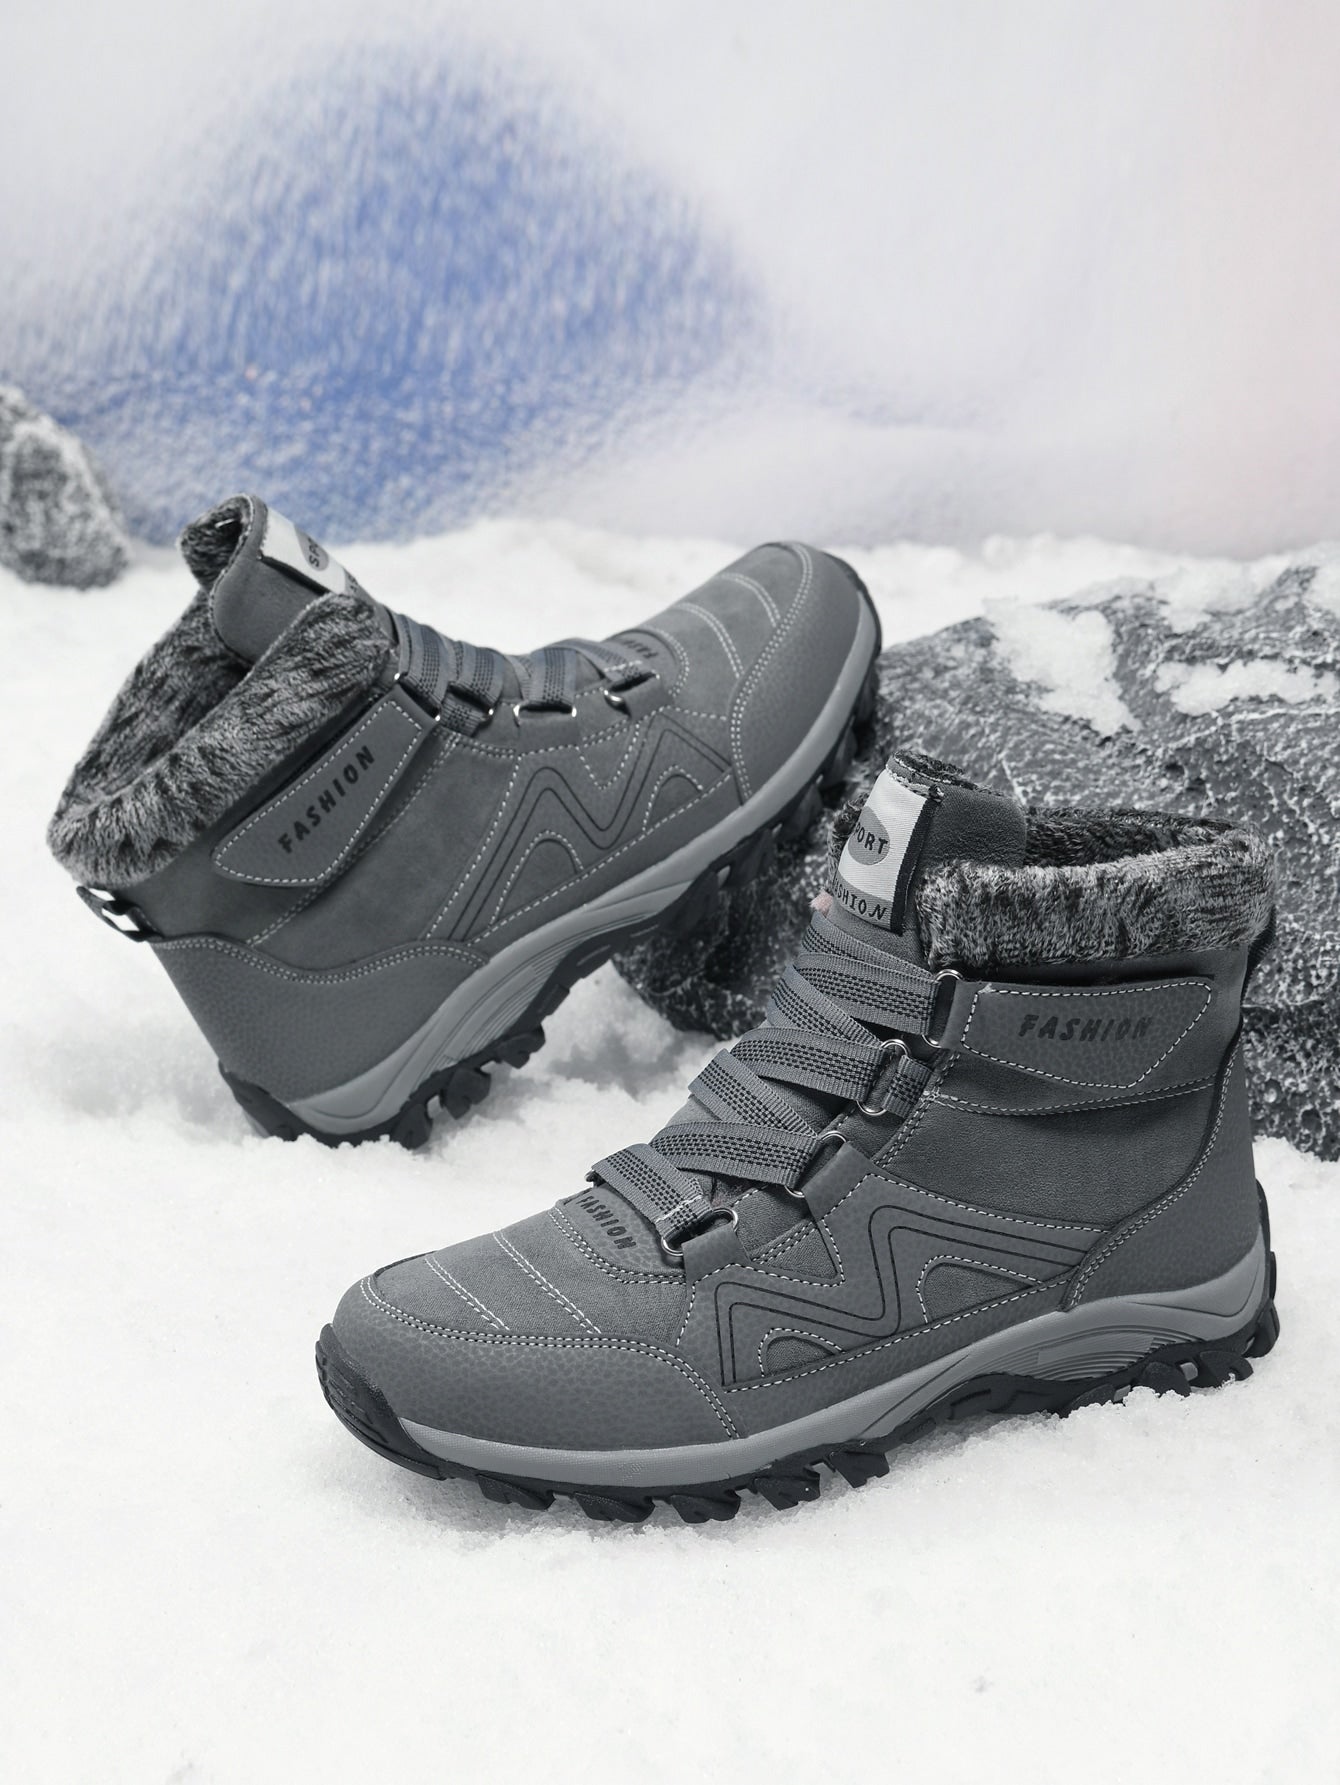 Men's Winter Outdoor Shoes, Running Shoes, Climbing Shoes, Non-slip, Warm Lined, Breathable, High Top, Snow Boots, Mountaineering And Hiking Shoes